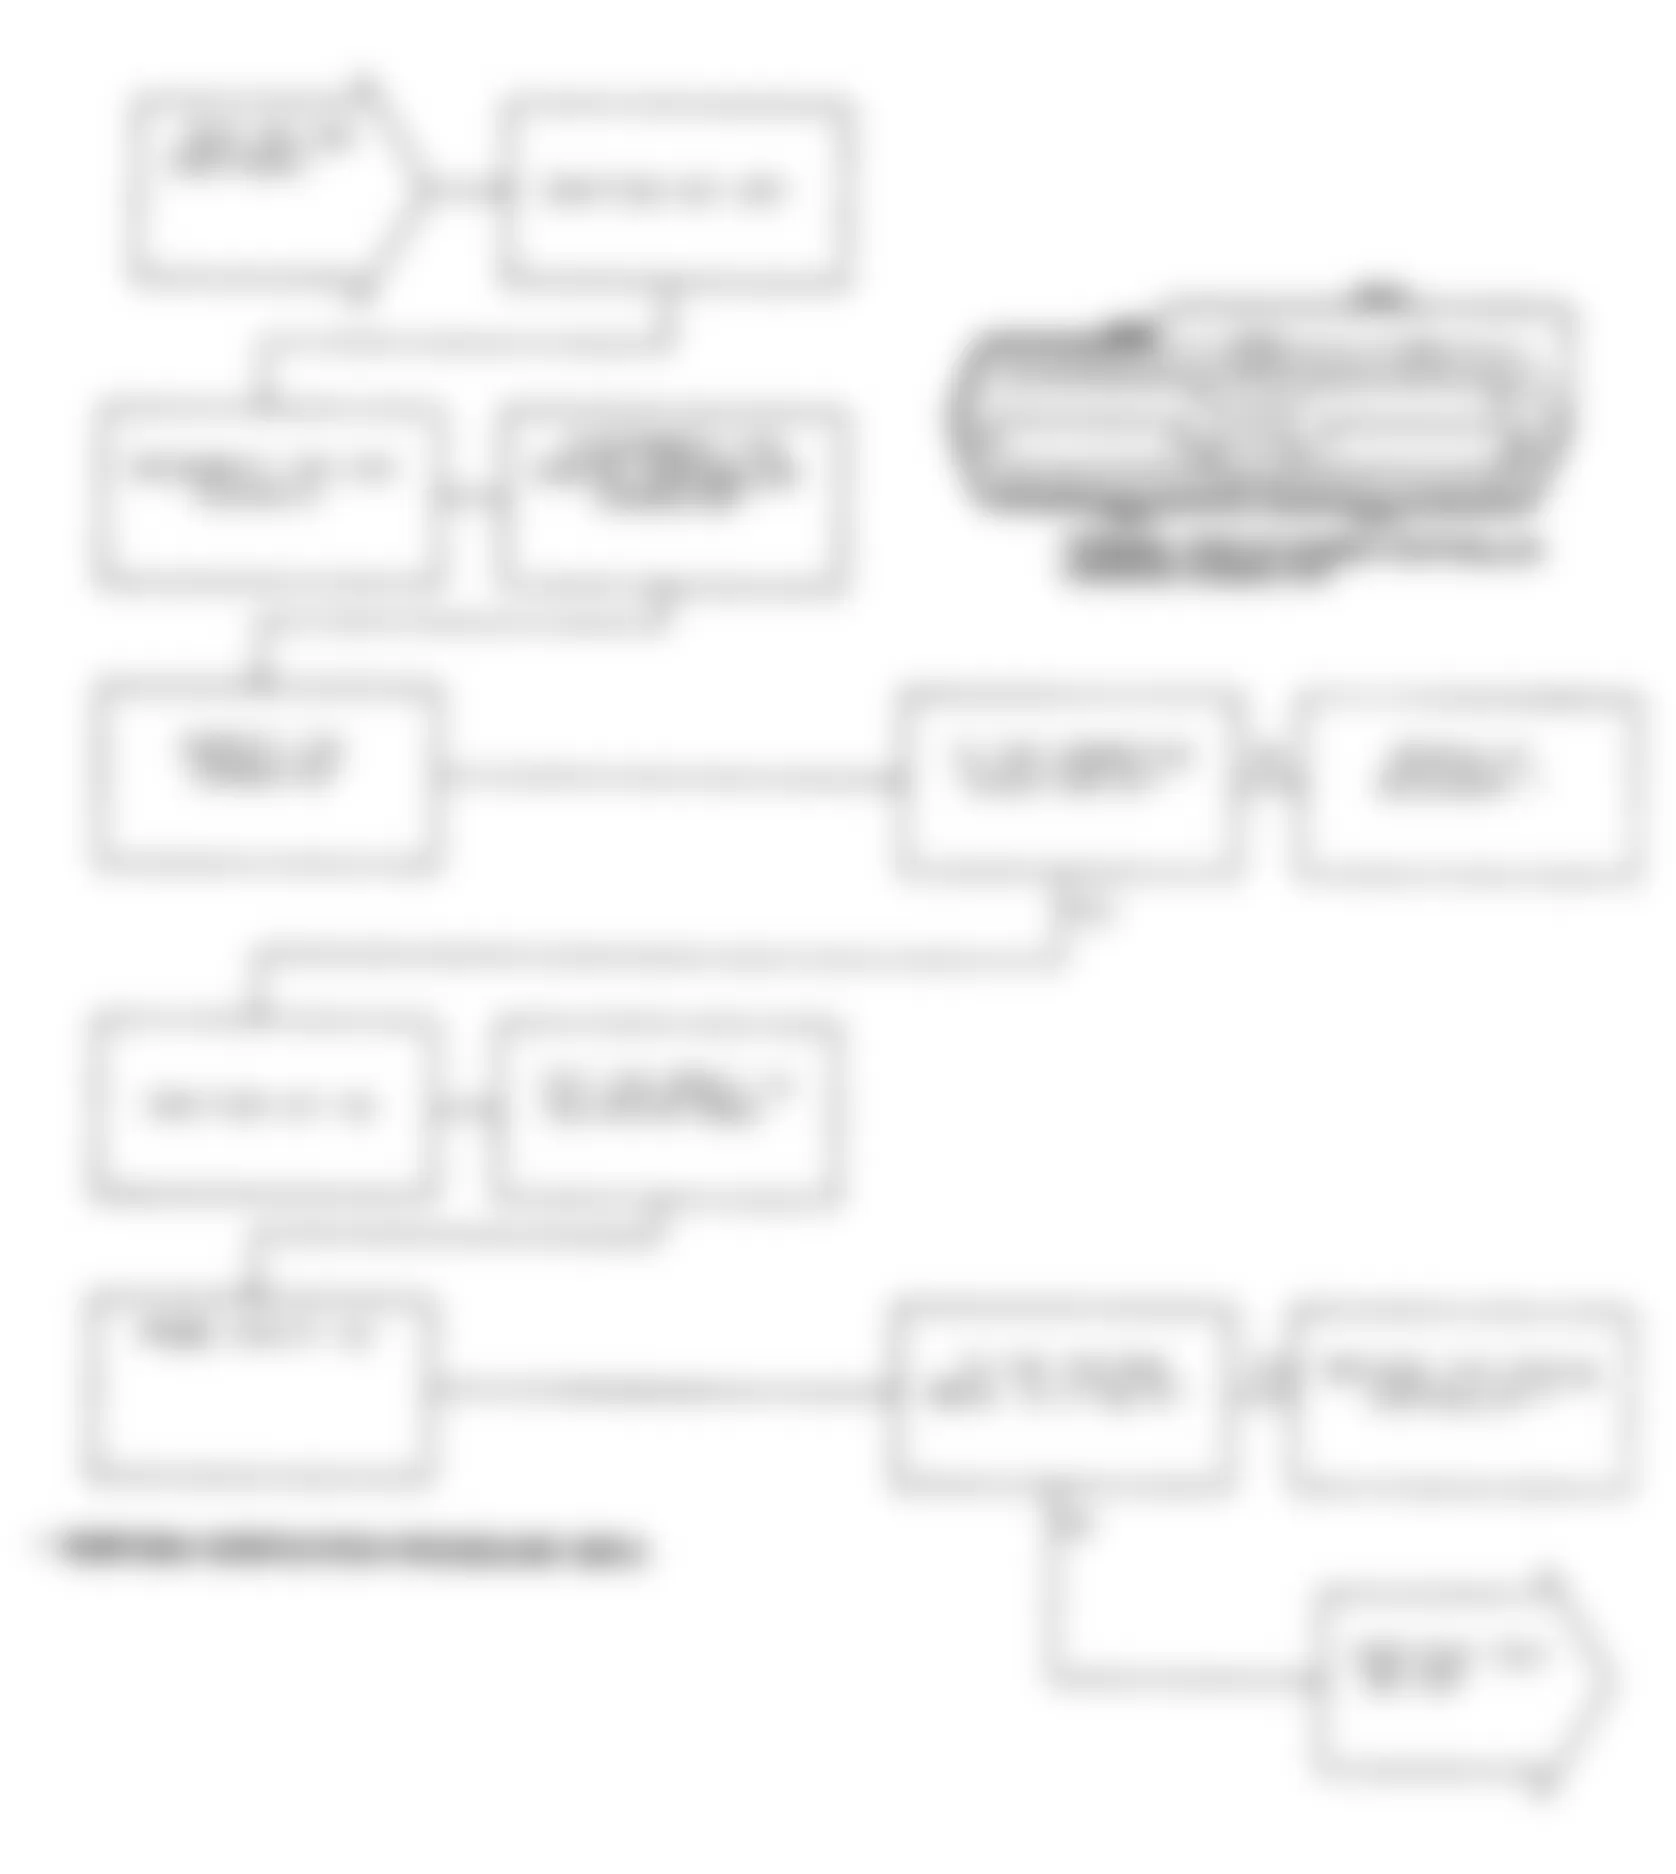 Chrysler LeBaron 1991 - Component Locations -  Test DR-19A Code 32, Diagnostic Flow Chart (2 of 3)